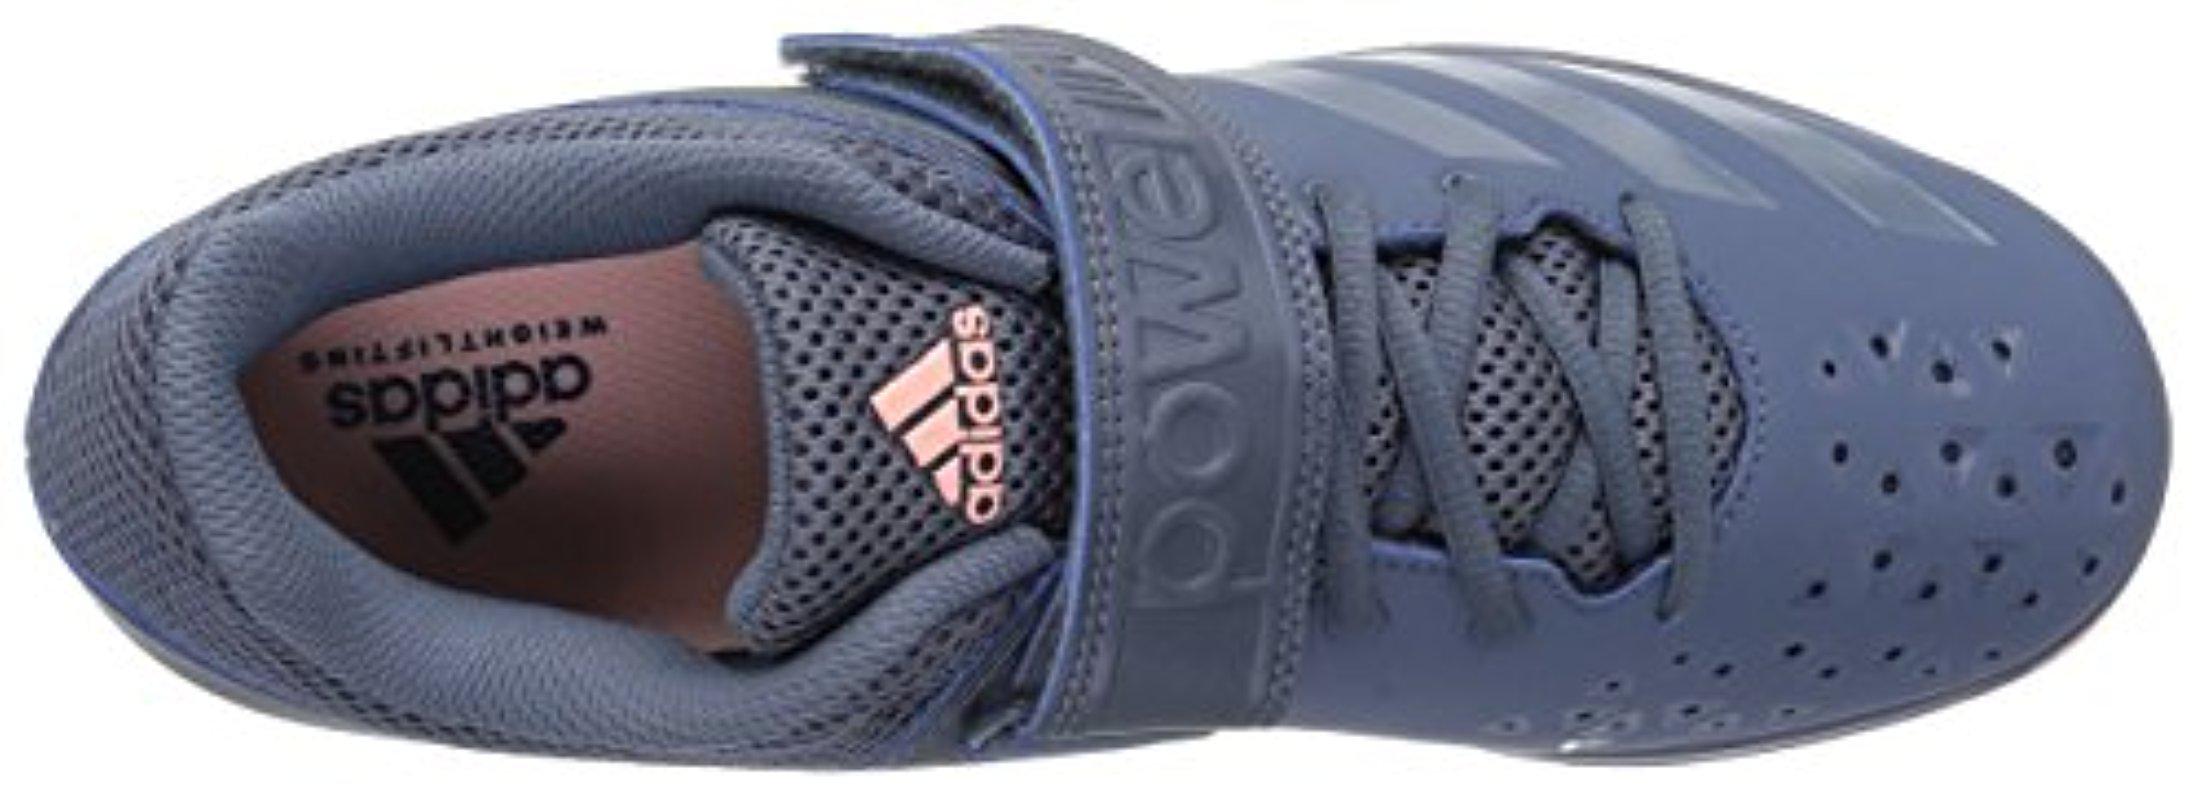 adidas Synthetic Powerlift.3.1 Cross Trainer in Blue for Men - Lyst